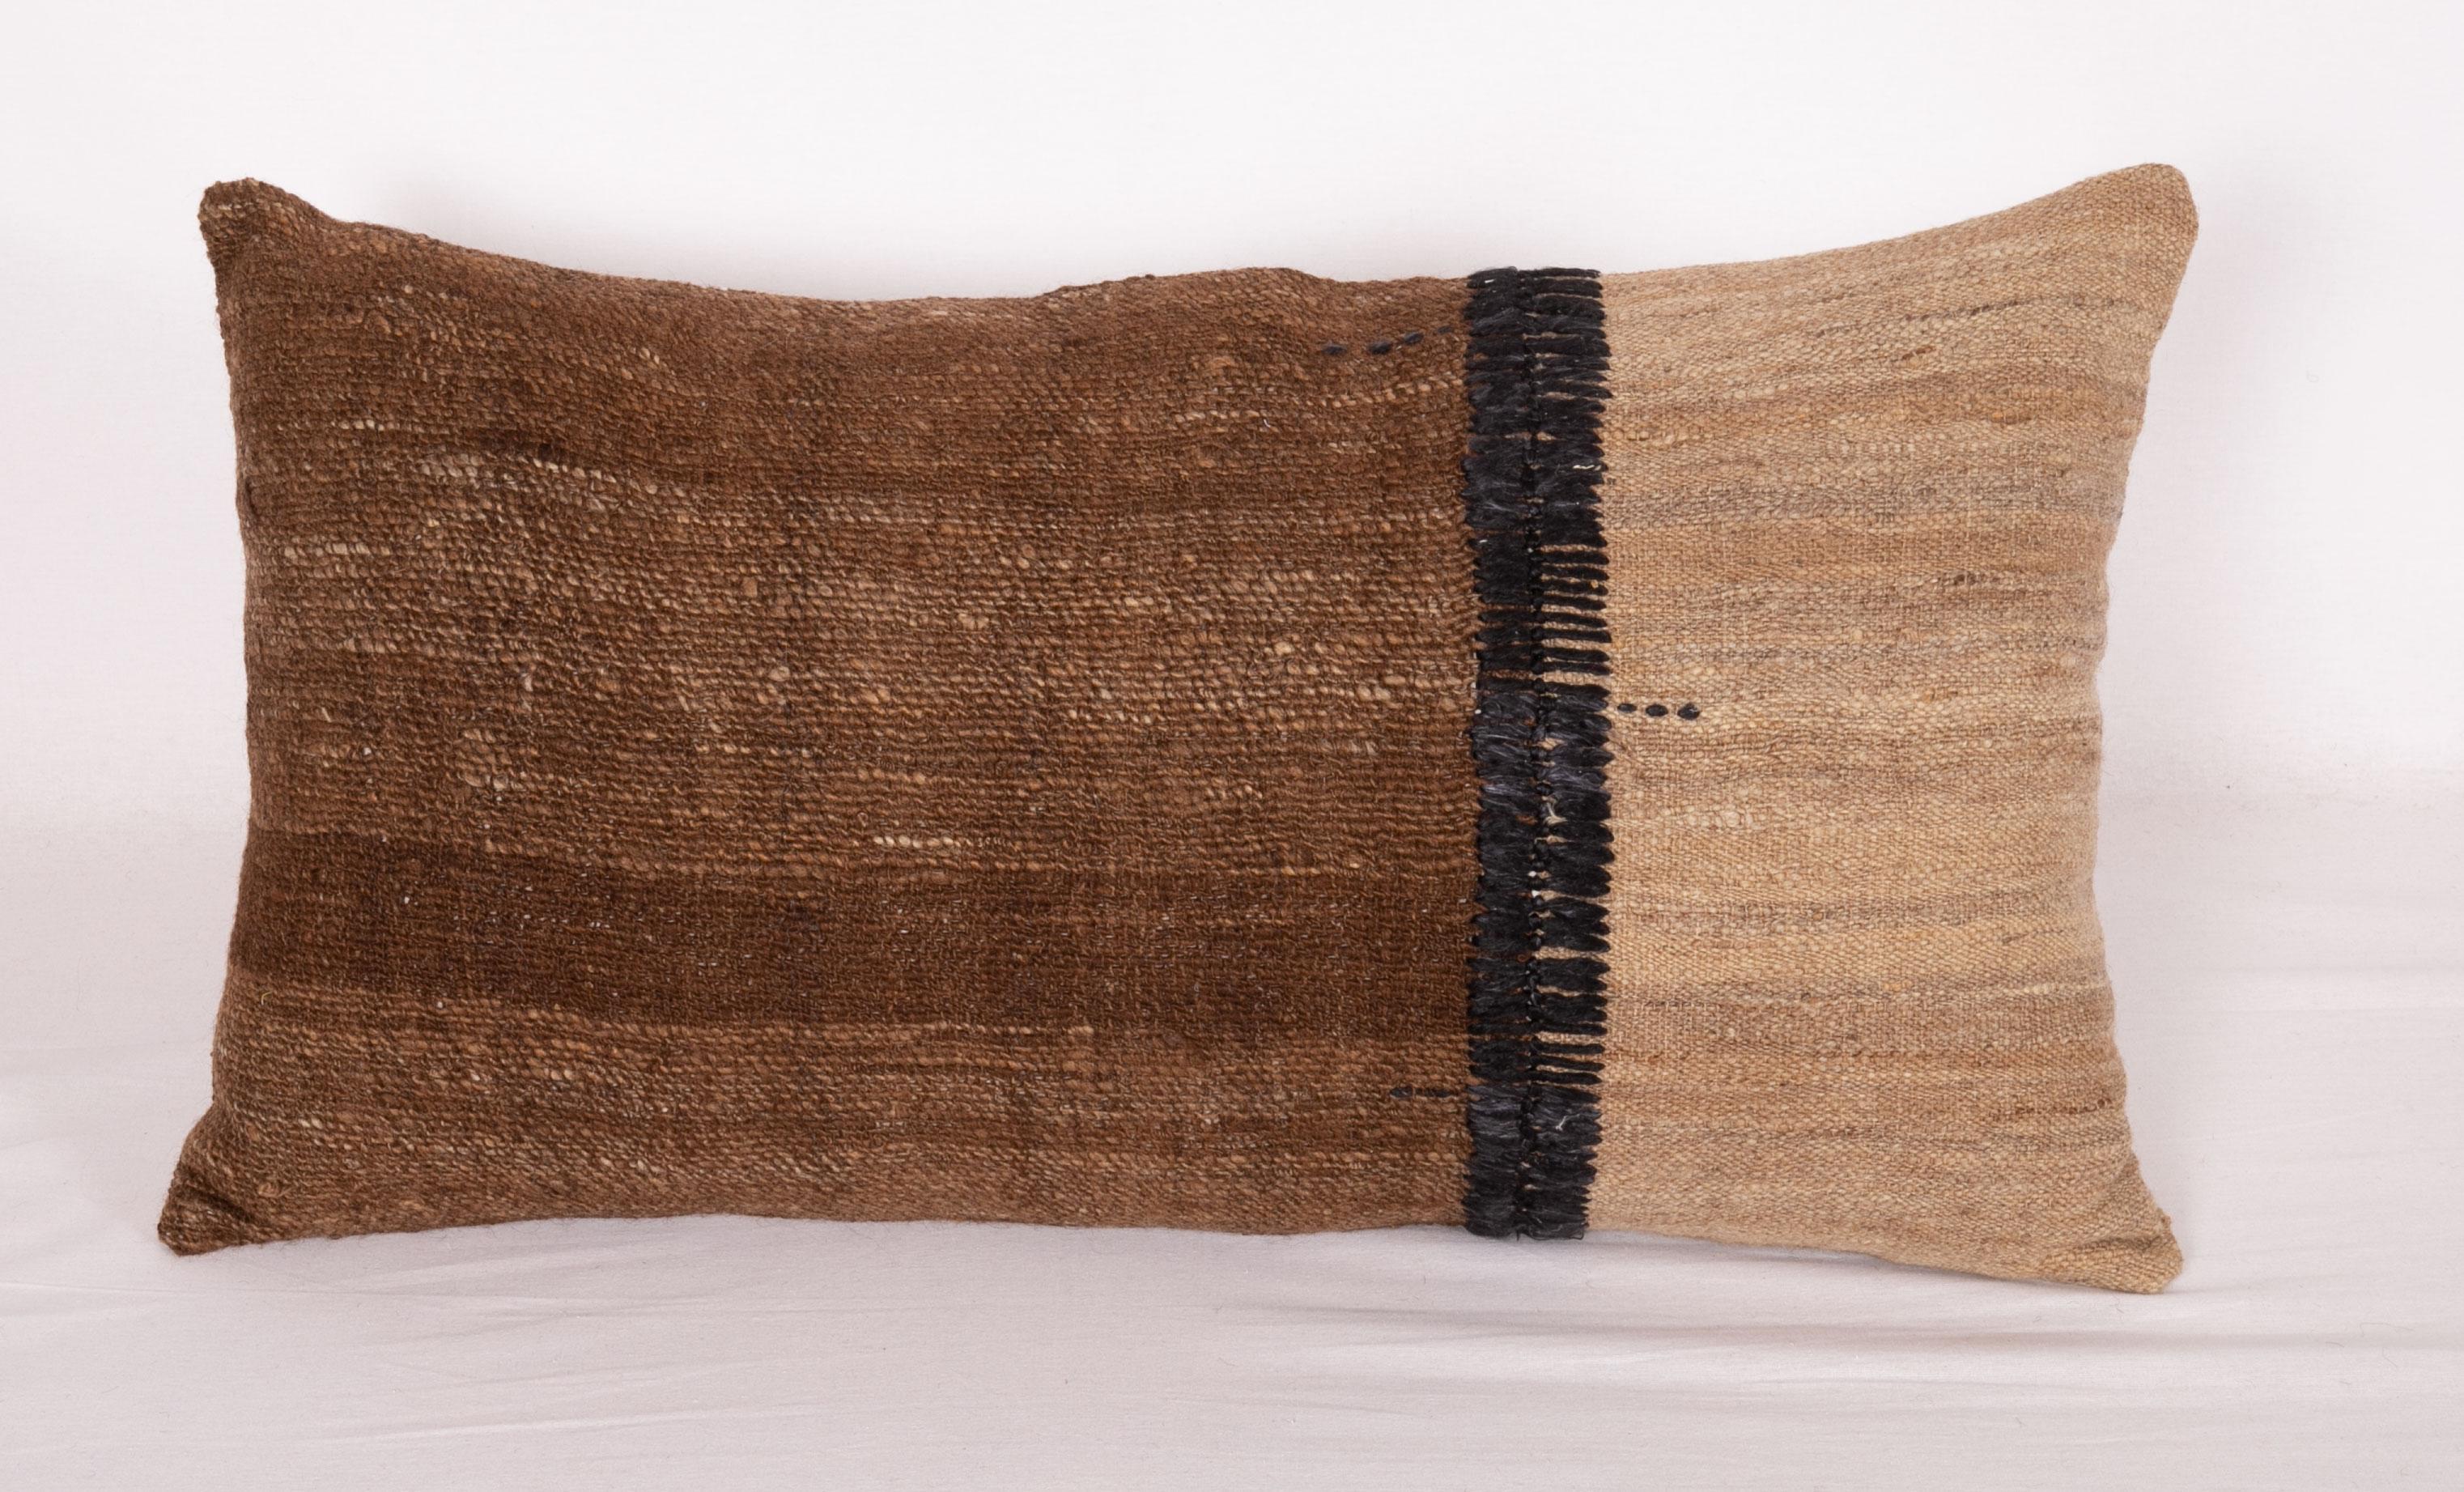 Wool Neutral Pillowcases Made from an Anatolian Vintage Cover, Mid-20th Century